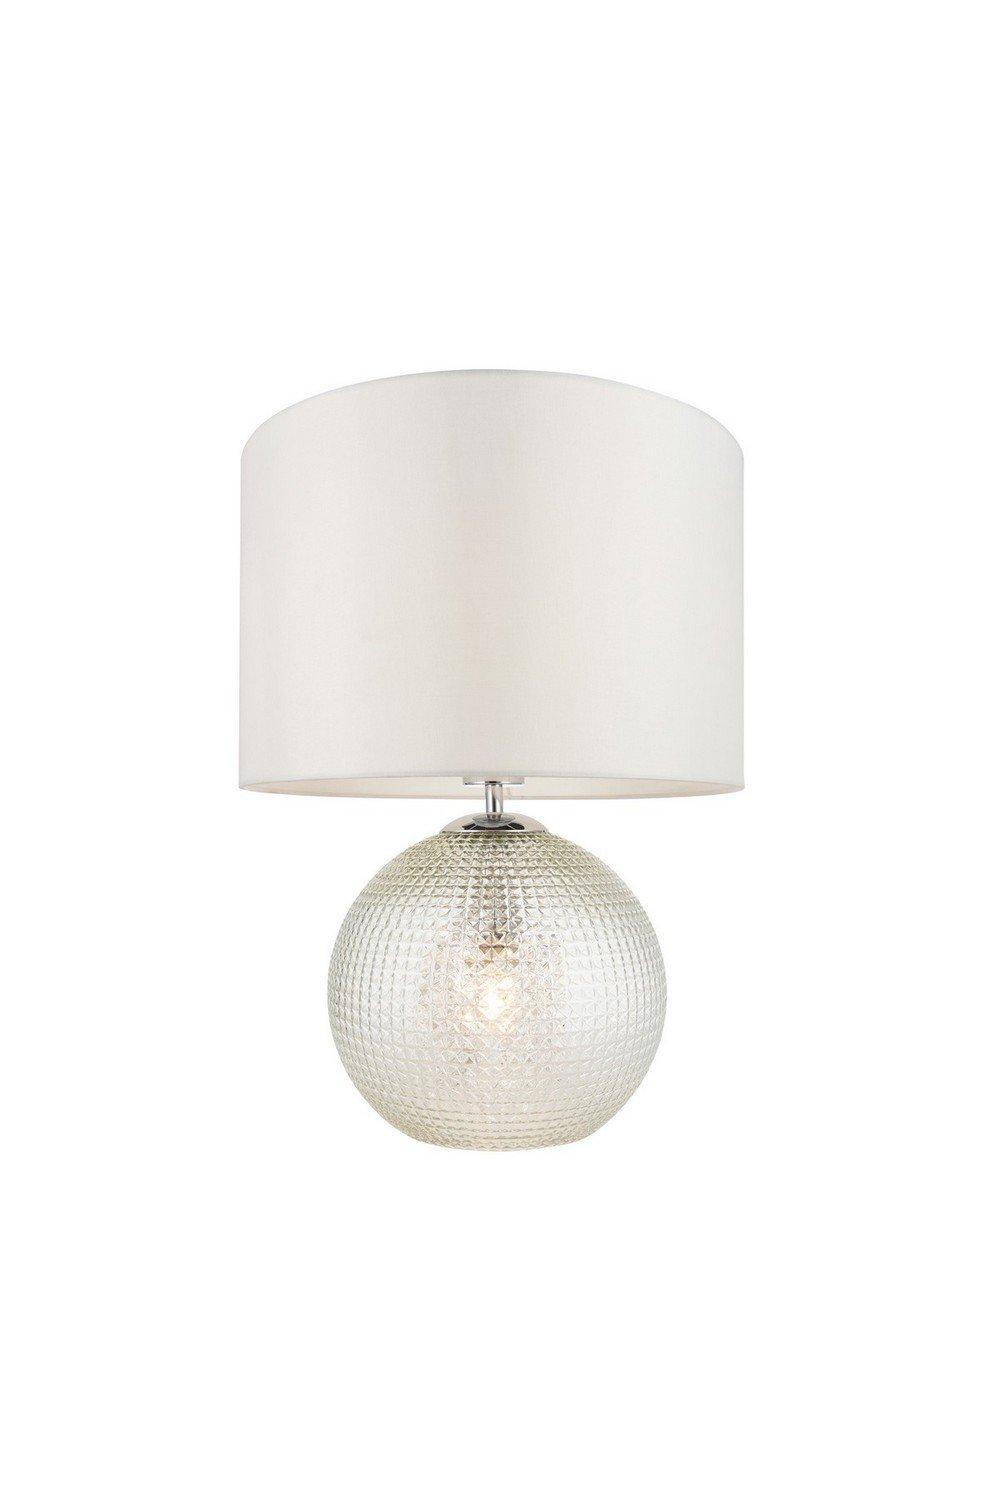 Knighton Modern Classic Twin Light Table Lamp Clear Ribbed Prism Base with White Fabric Shade